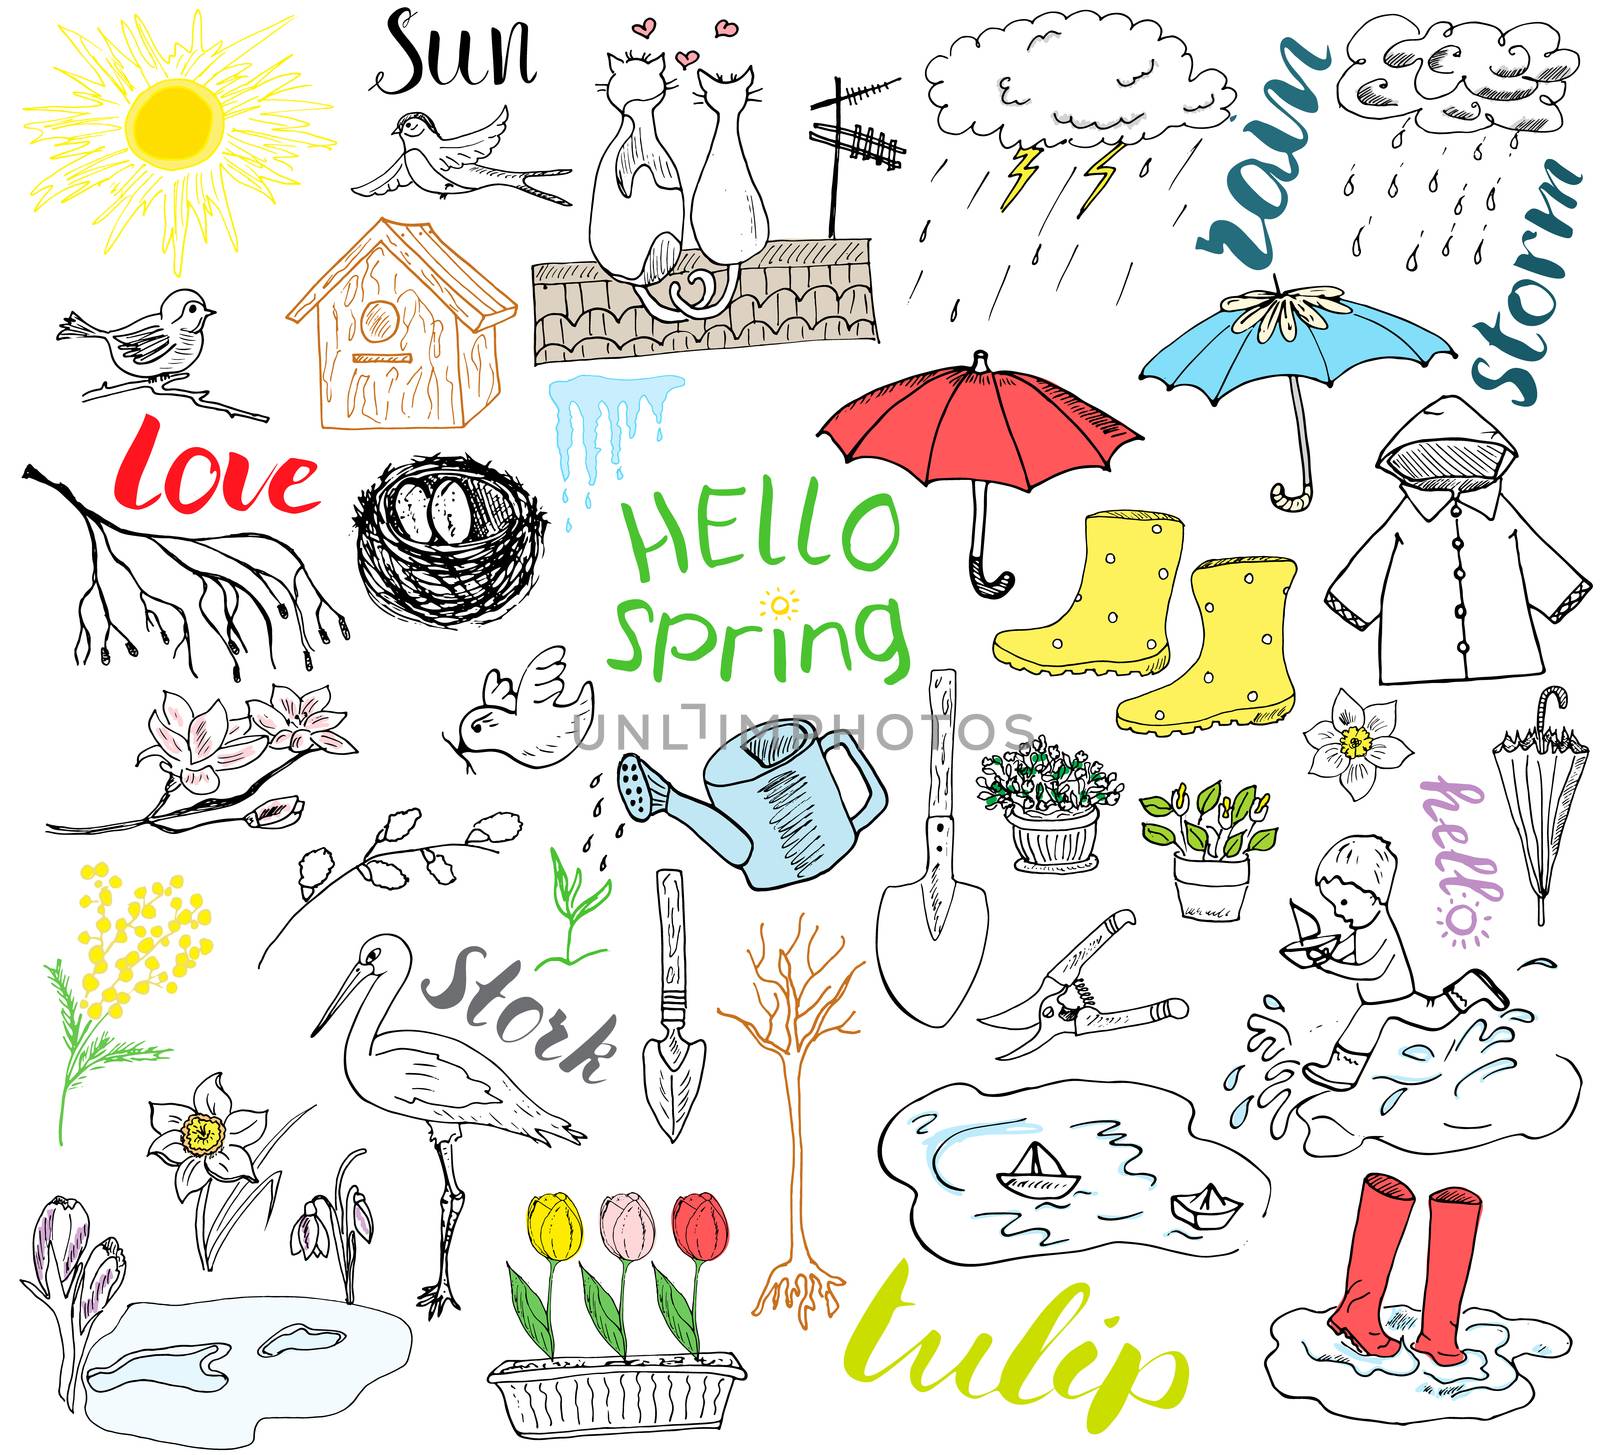 Spring season set doodles elements. Hand drawn sketch set with umbrella, rain, rubber boots, raincoat, flovers, garden tools, nest and birds. Drawing doodle collection, isolated on white background.